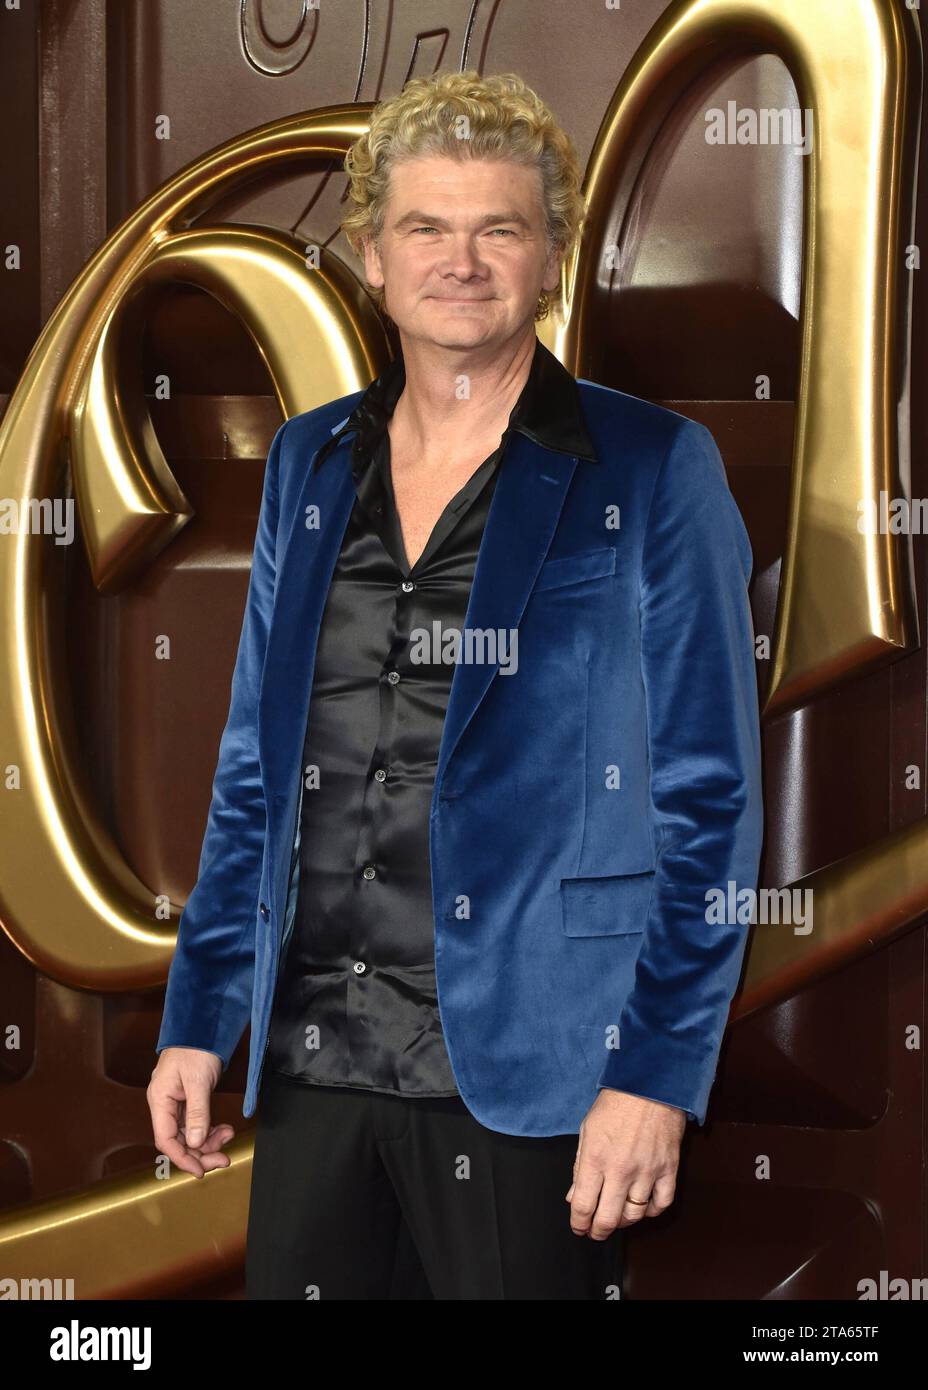 London, England. UK. Am 28. Dienstag nimmt Simon Farnaby an der Wonka-Weltpremiere in der Royal Festival Hall in London Teil. UK. Dienstag, 28. November 2023 - BANG MEDIA INTERNATIONAL FAMOUS PICTURES 28 HOLMES ROAD LONDON NW5 3AB VEREINIGTES KÖNIGREICH Tel. 44 0 02 7485 1005 E-Mail: picturesfamous.uk.com Copyright: XJamesxWarrenx FP Wonka World Premiere 101 Credit: Imago/Alamy Live News Stockfoto